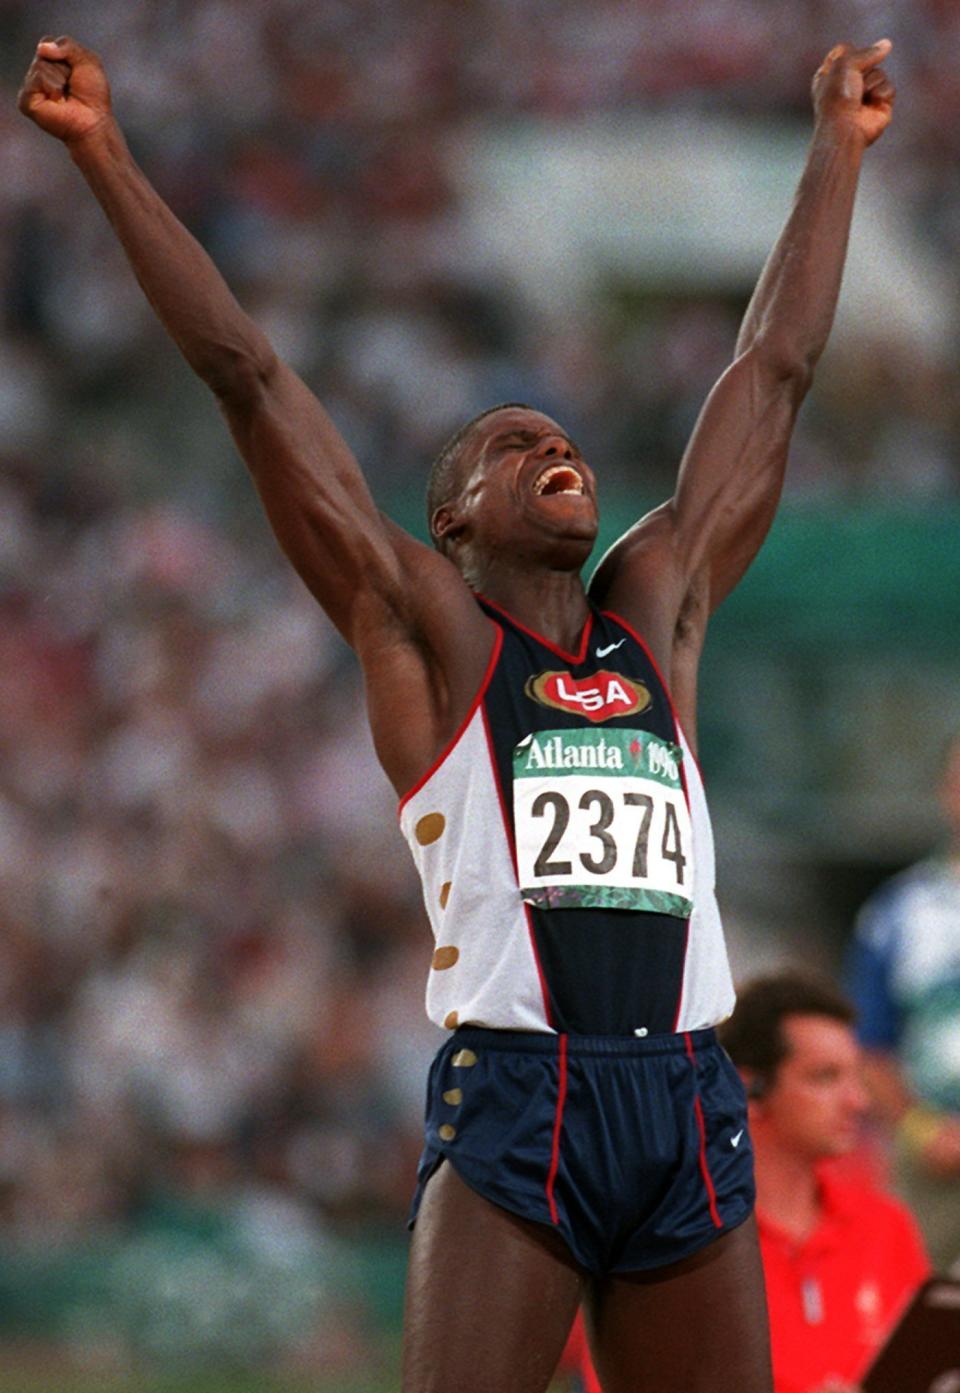 FILE - In this Monday, July 29, 1996, file photo, Carl Lewis of the United States celebrates after his third jump in the men's long jump final at the 1996 Summer Olympic Games in Atlanta. (AP Photo/Diether Endlicher, File)